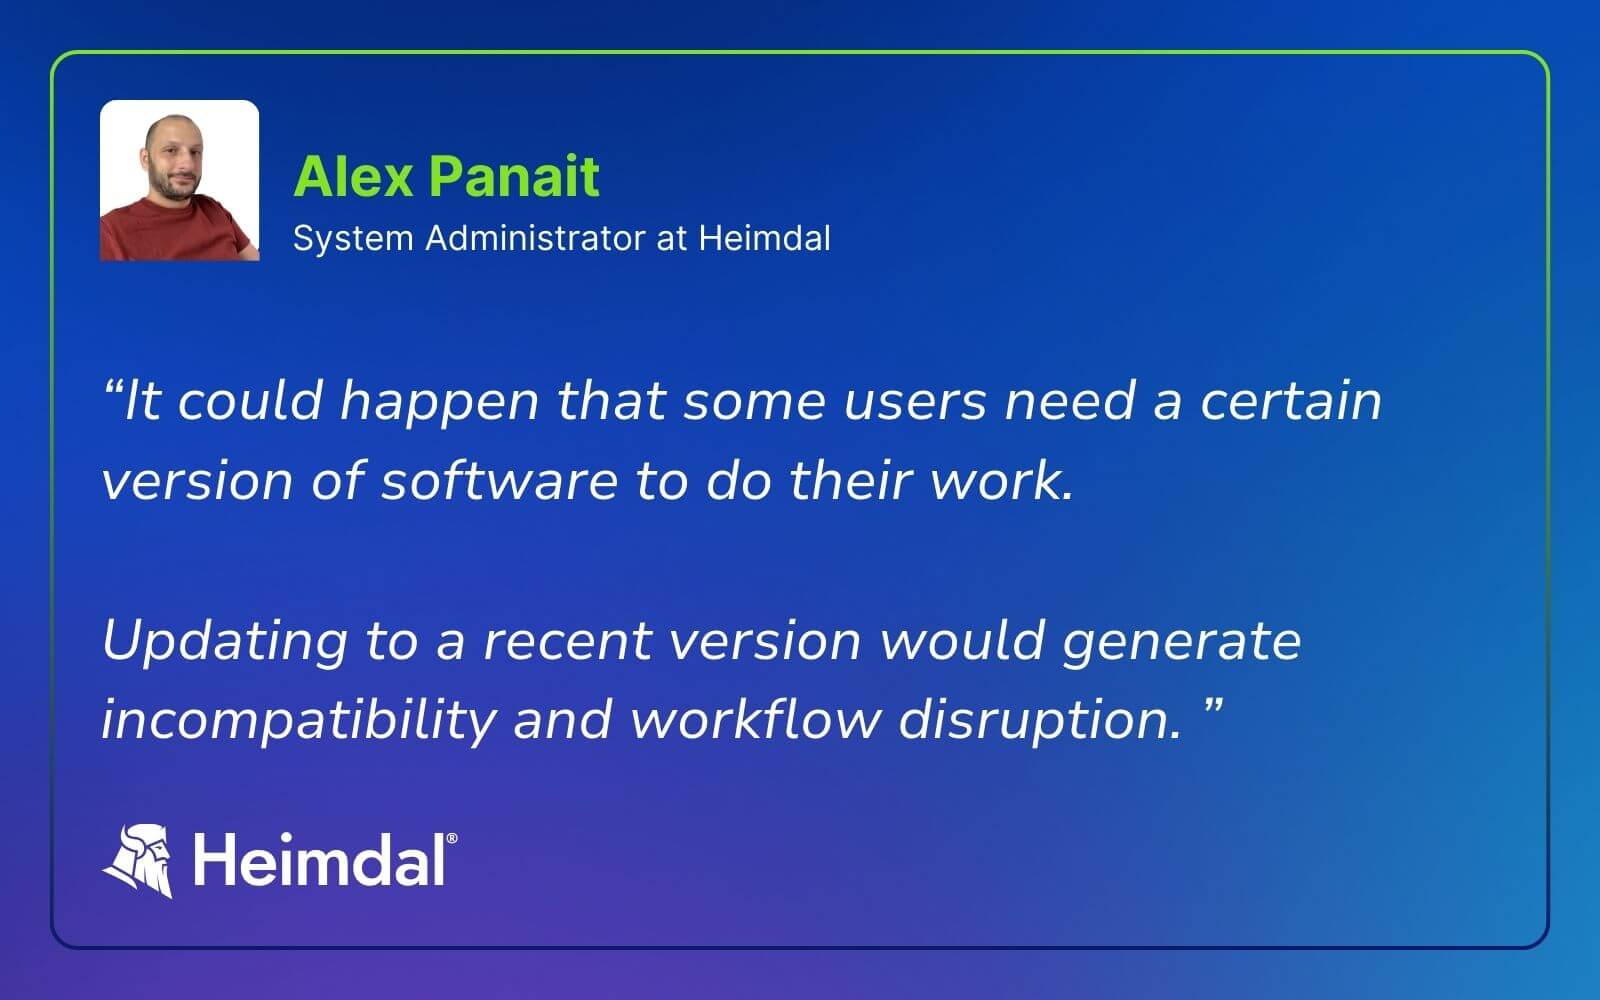 System Administrator Alex Panait on patch management challenges